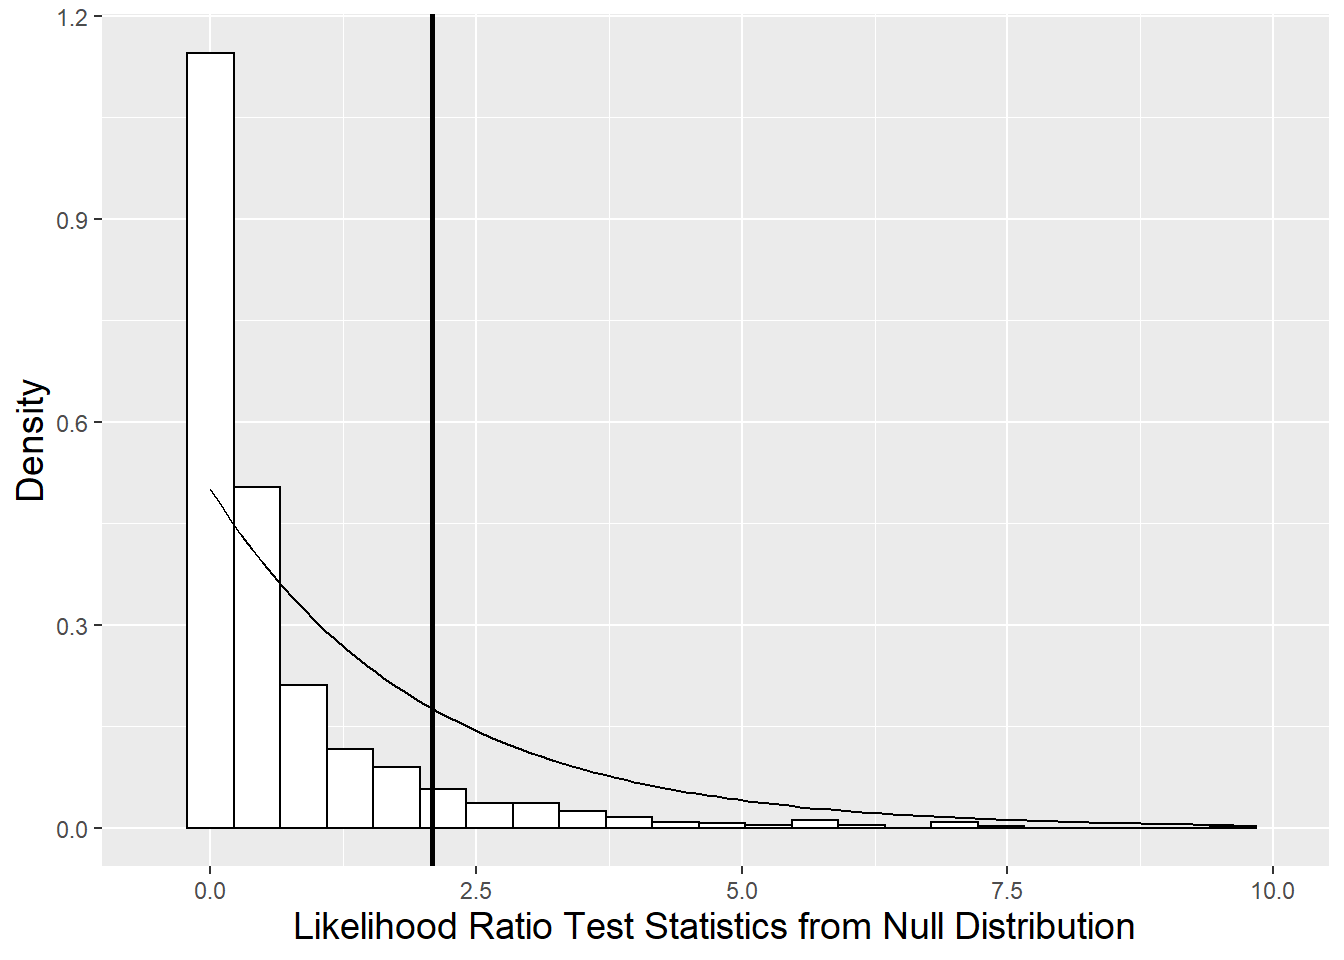 Null distribution of likelihood ratio test statistic derived using parametric bootstrap (histogram) compared to a chi-square distribution with 2 degrees of freedom (smooth curve).  The vertical line represents the observed likelihood ratio test statistic.